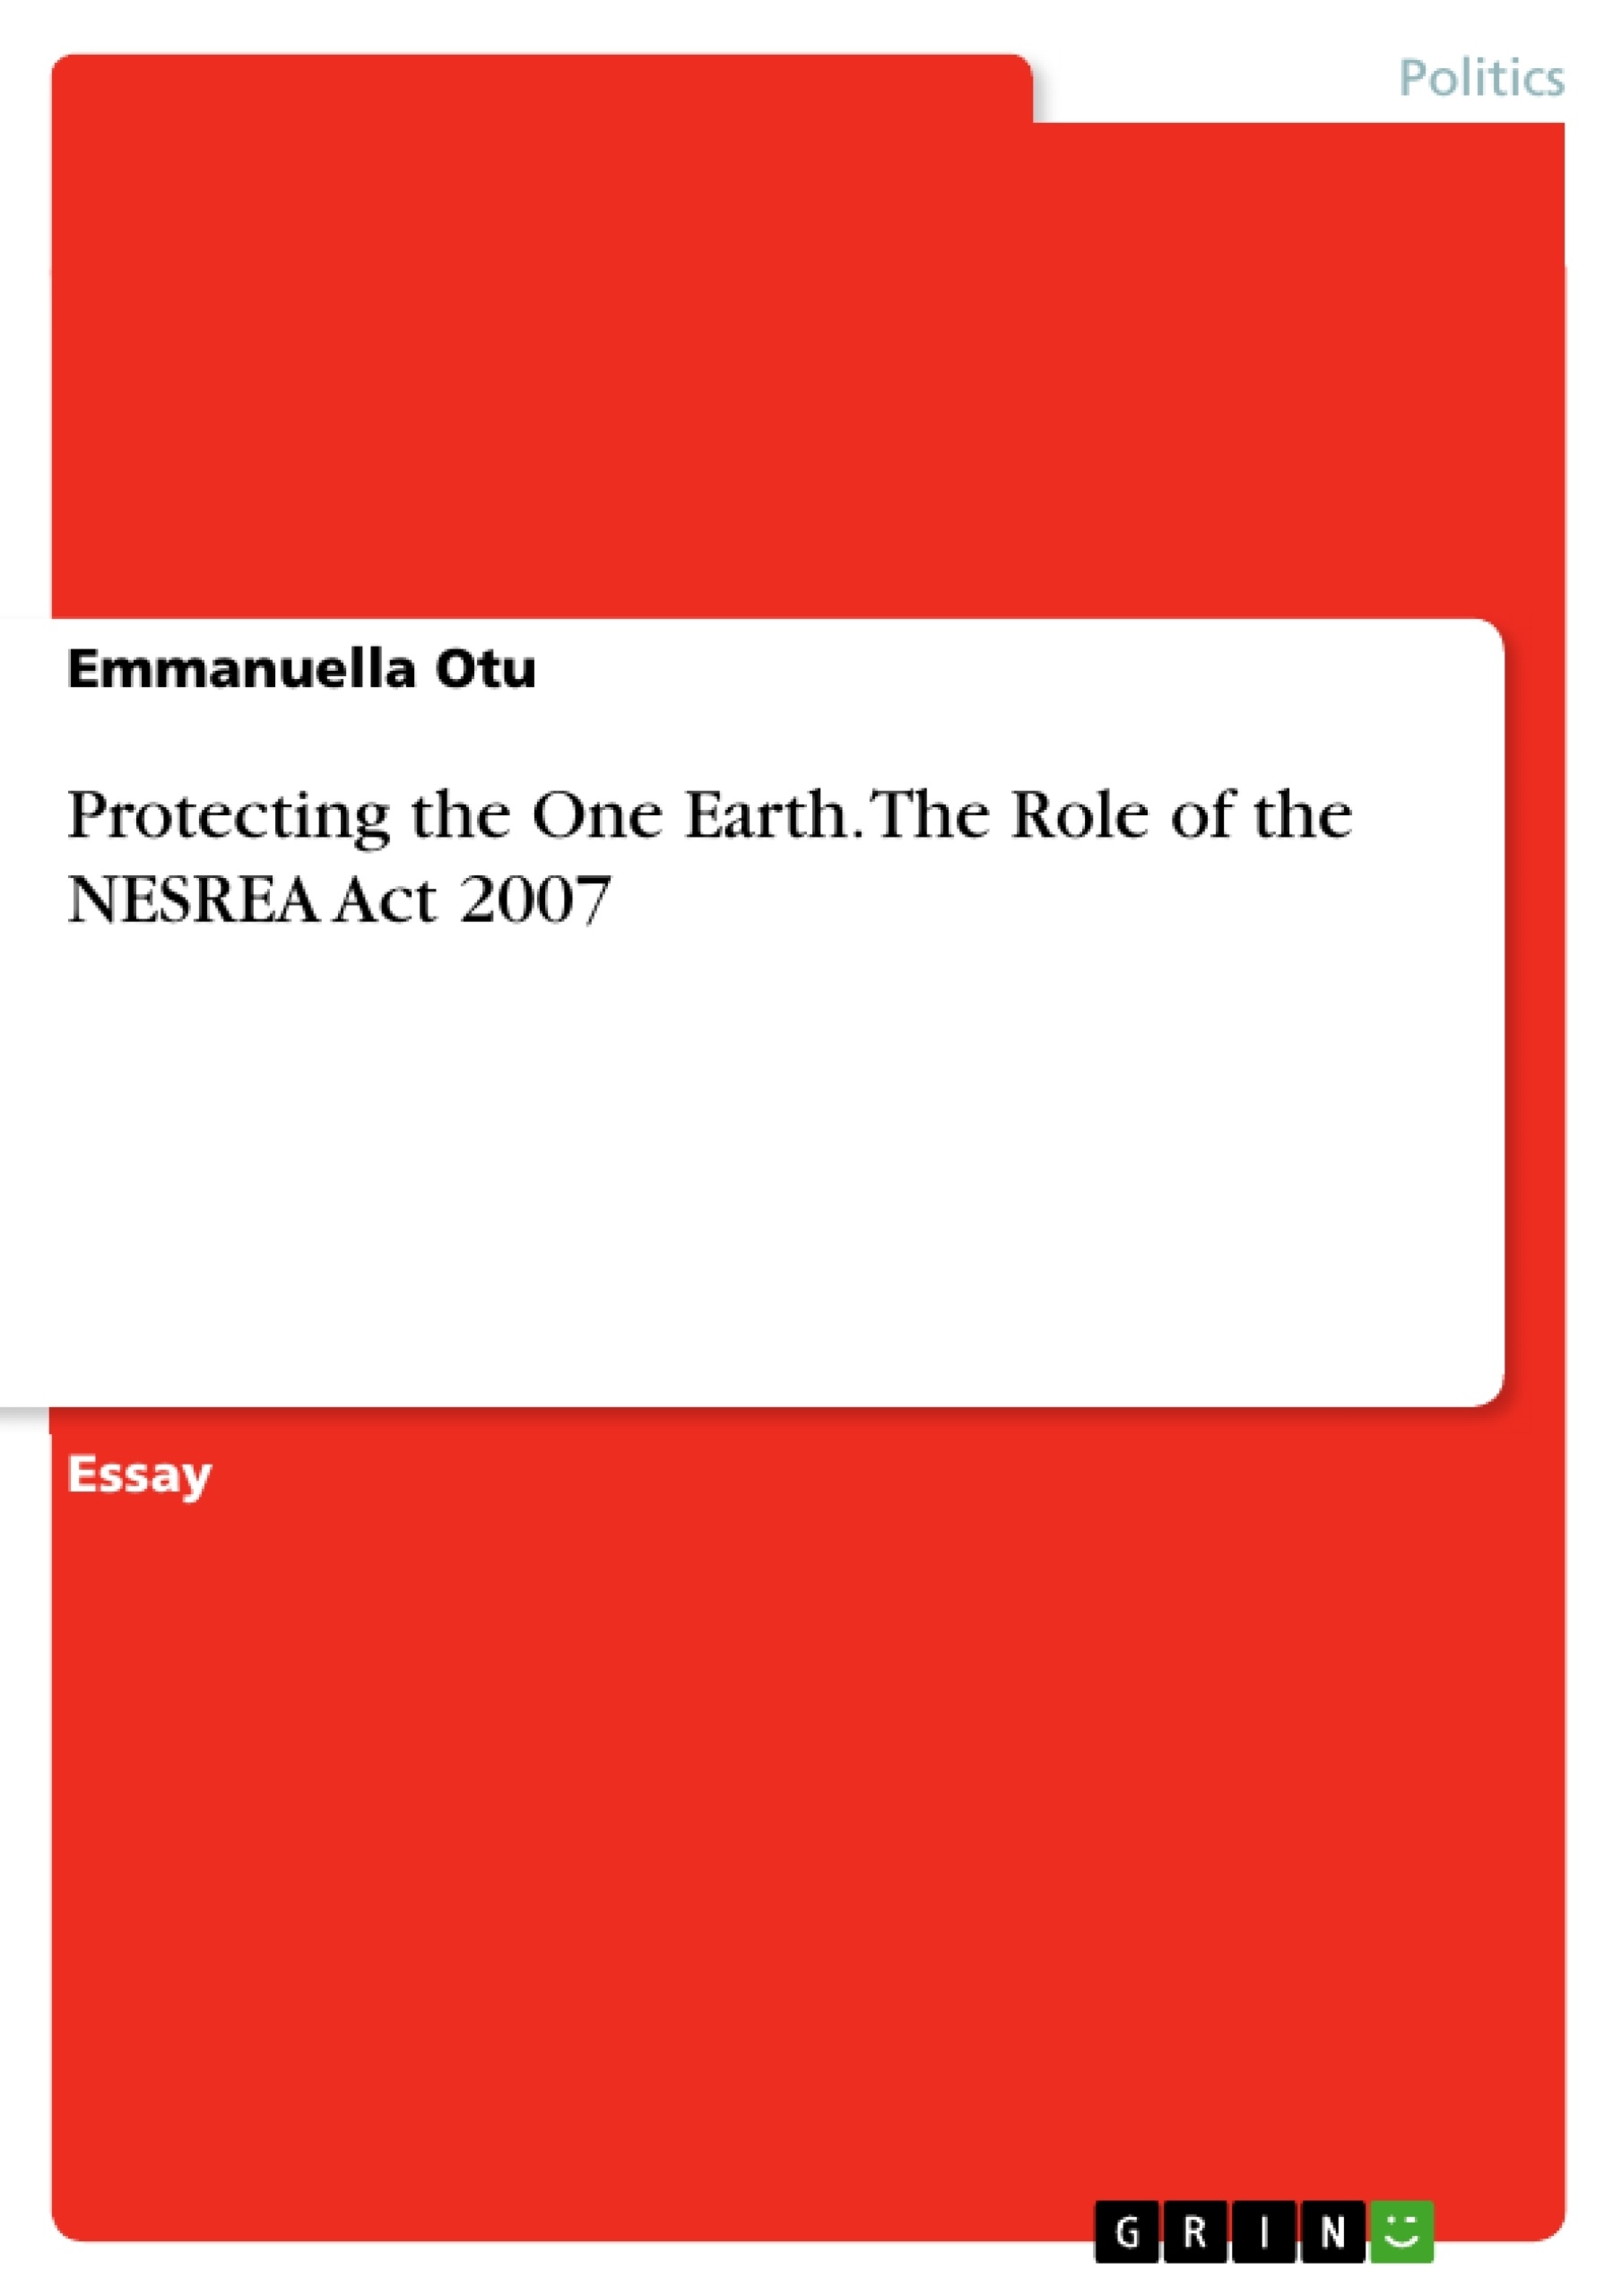 Title: Protecting the One Earth. The Role of the NESREA Act 2007